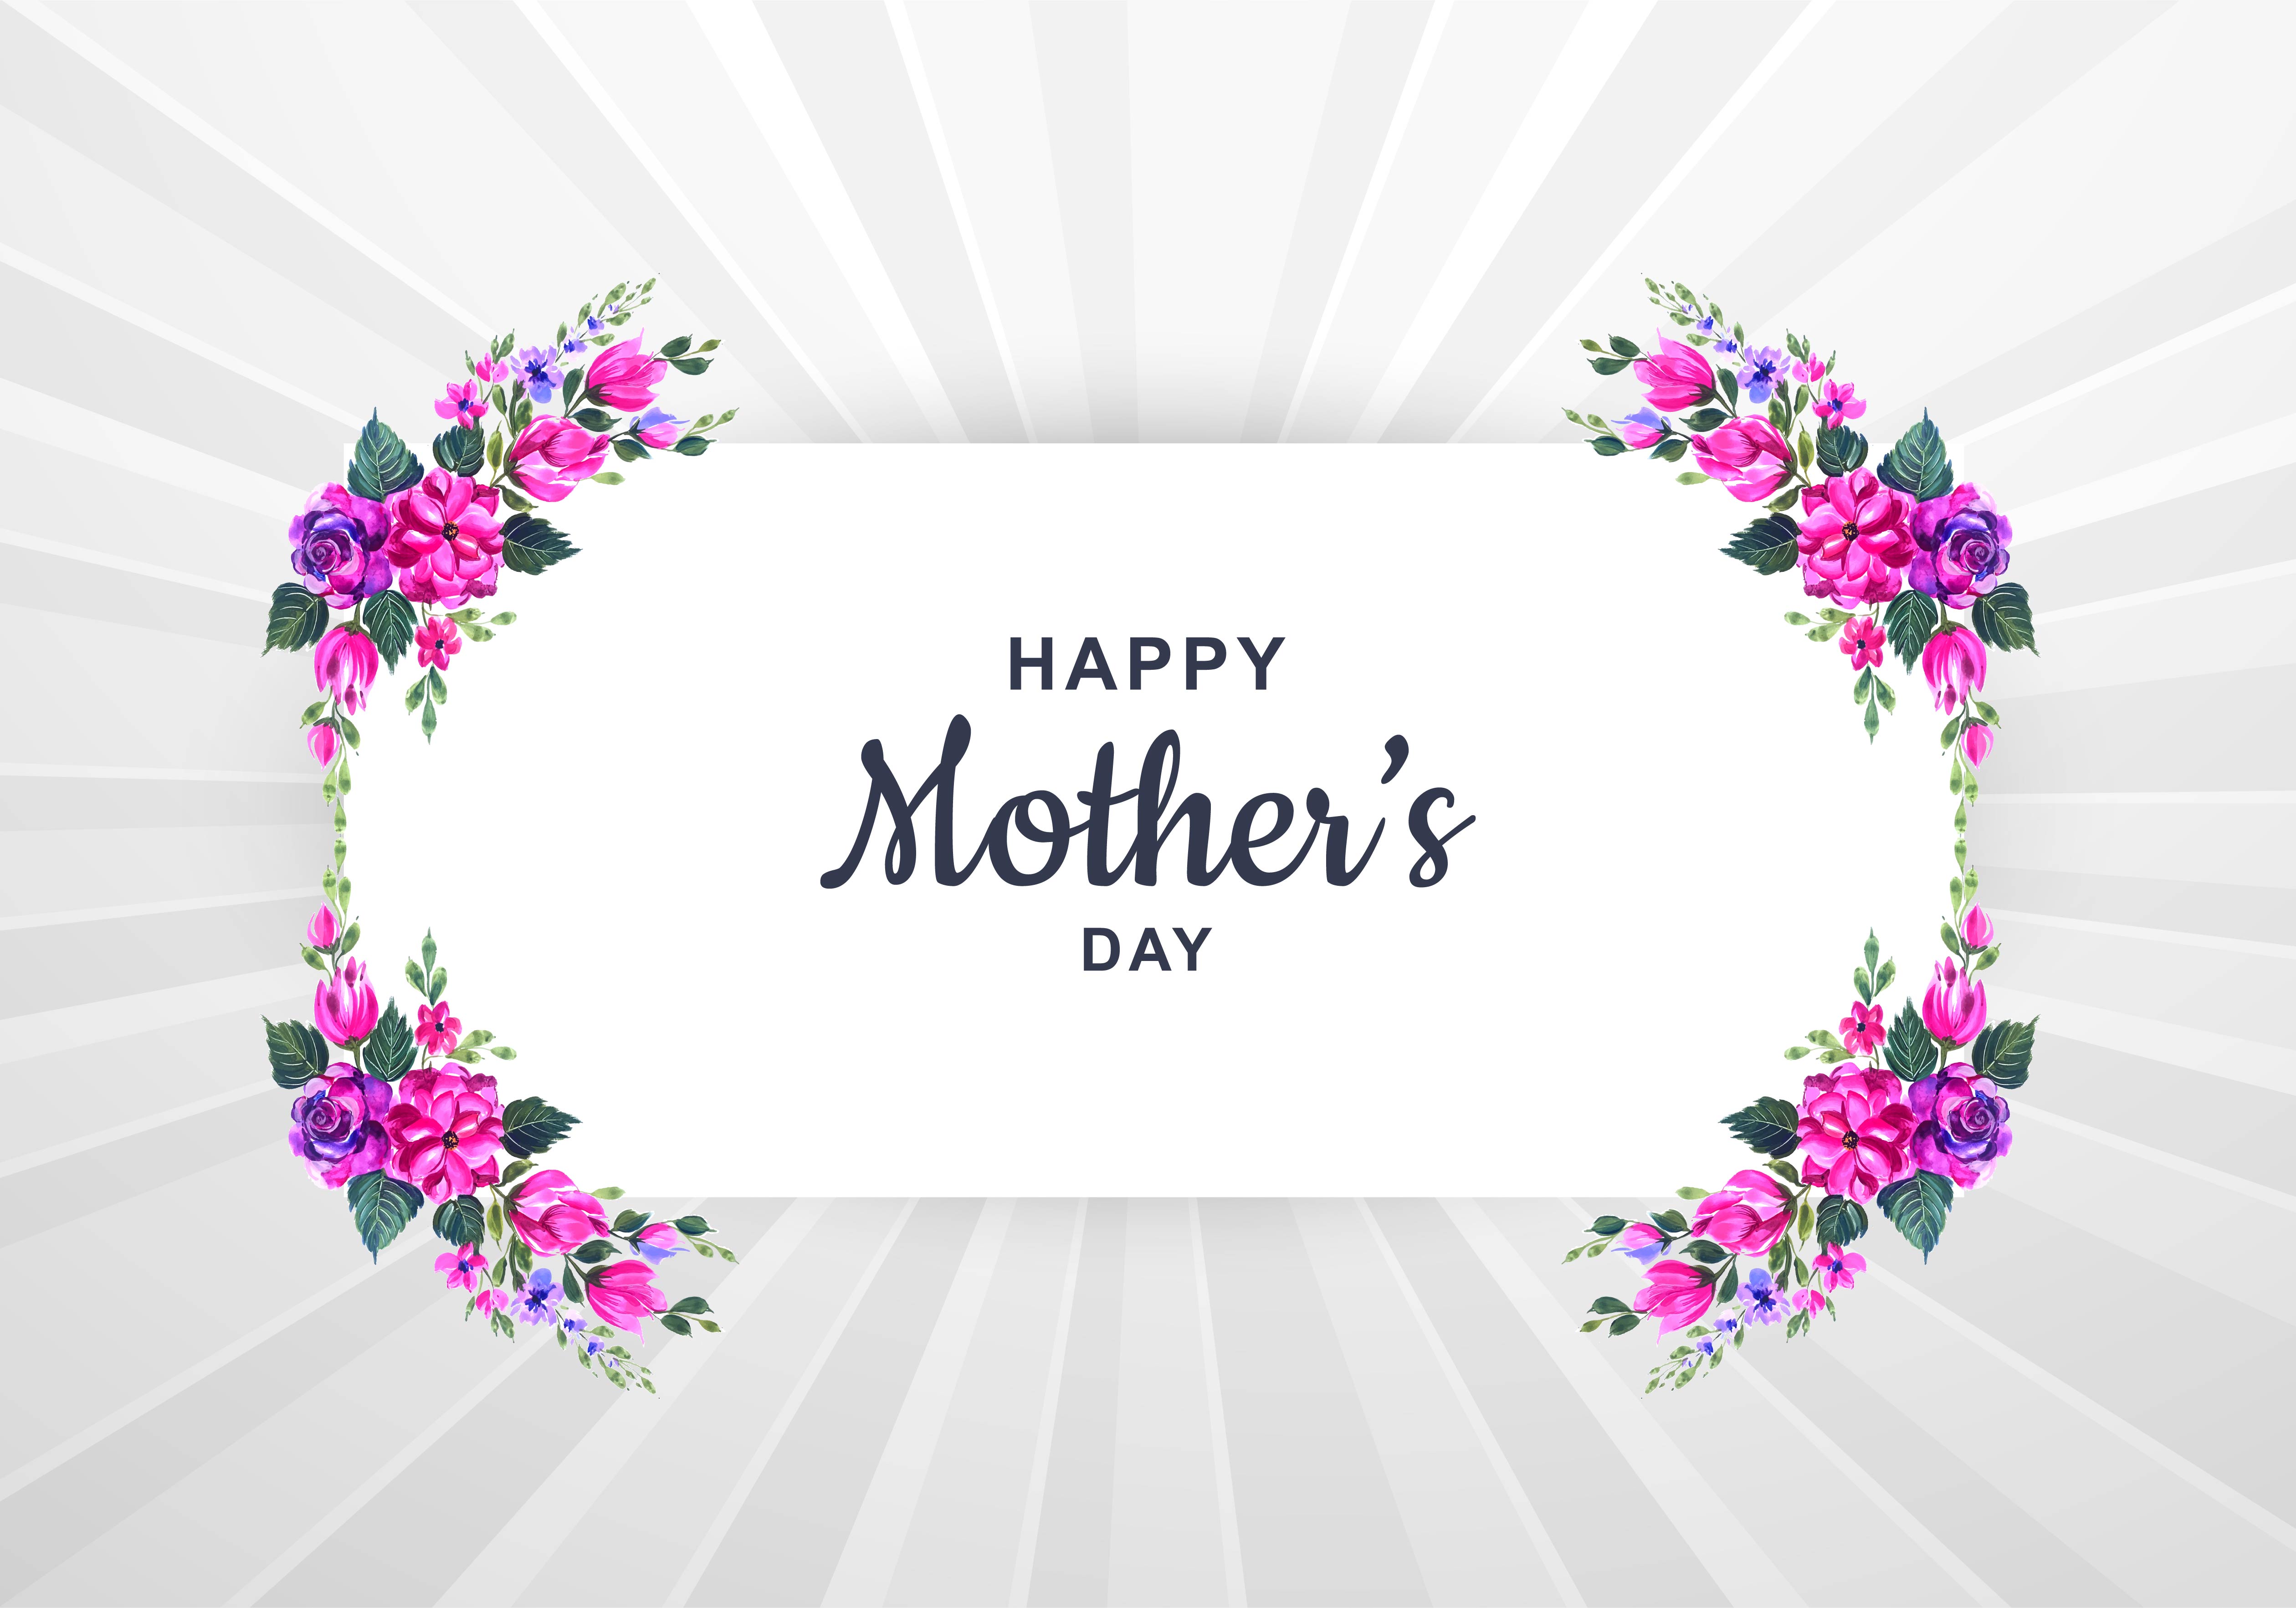 Download Mother's Day card with watercolor floral frame 1047505 - Download Free Vectors, Clipart Graphics ...